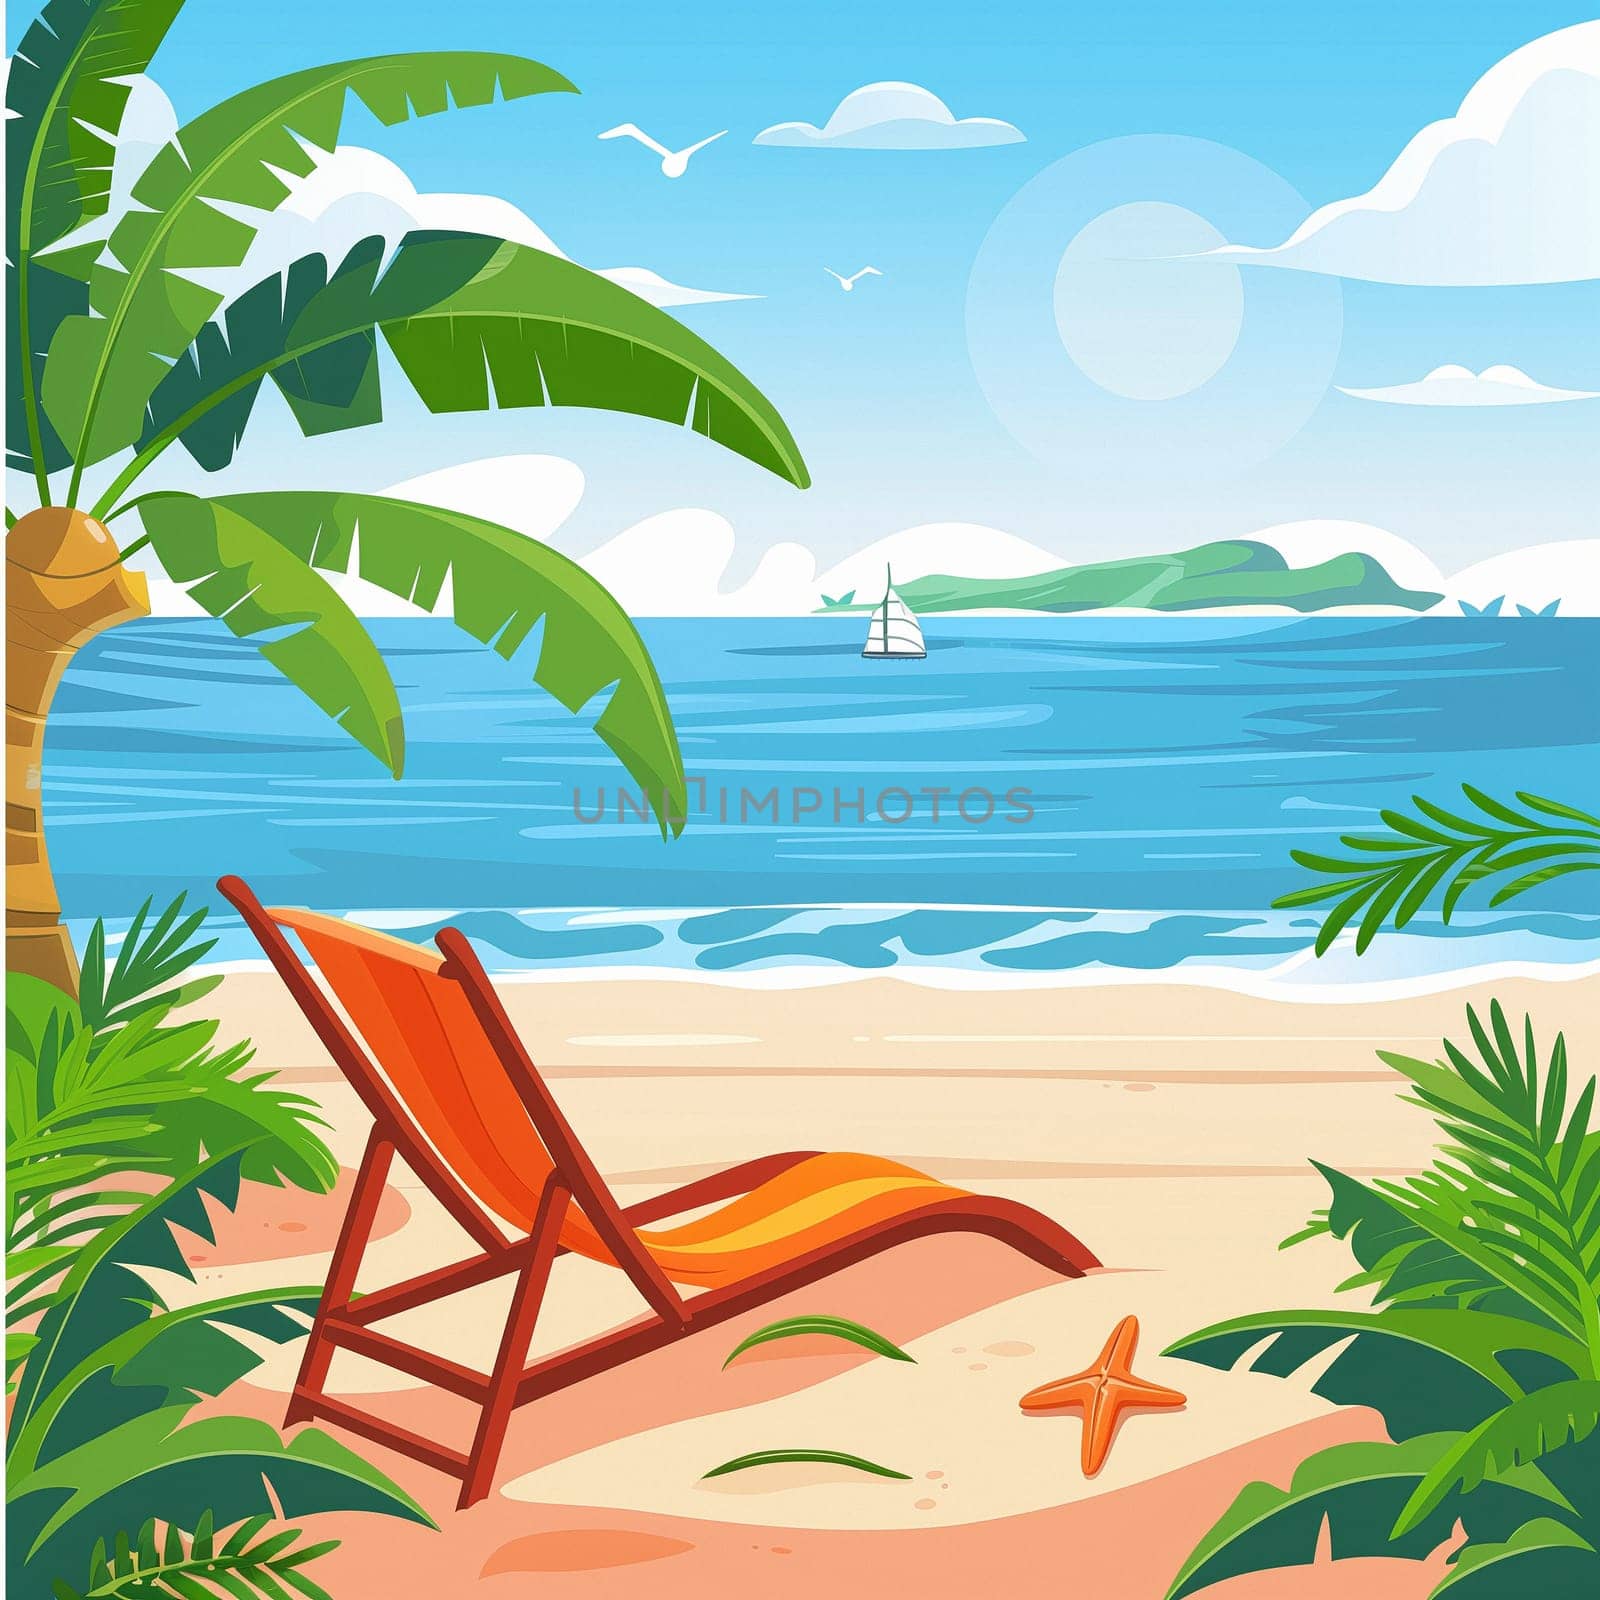 A wide background with summer illustrated art about playing on the beach and relaxing by NeuroSky